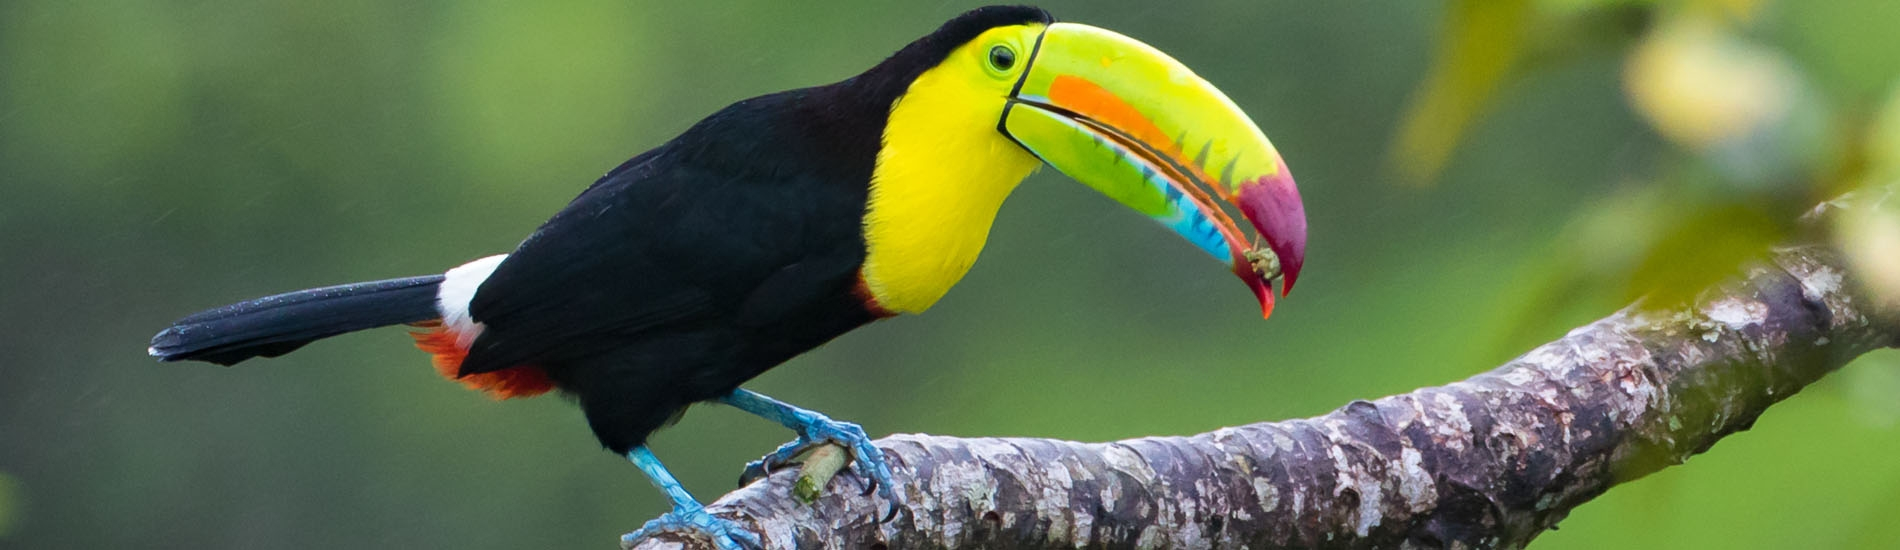 Tortuguero, National Park - Yellow Throated Toucan